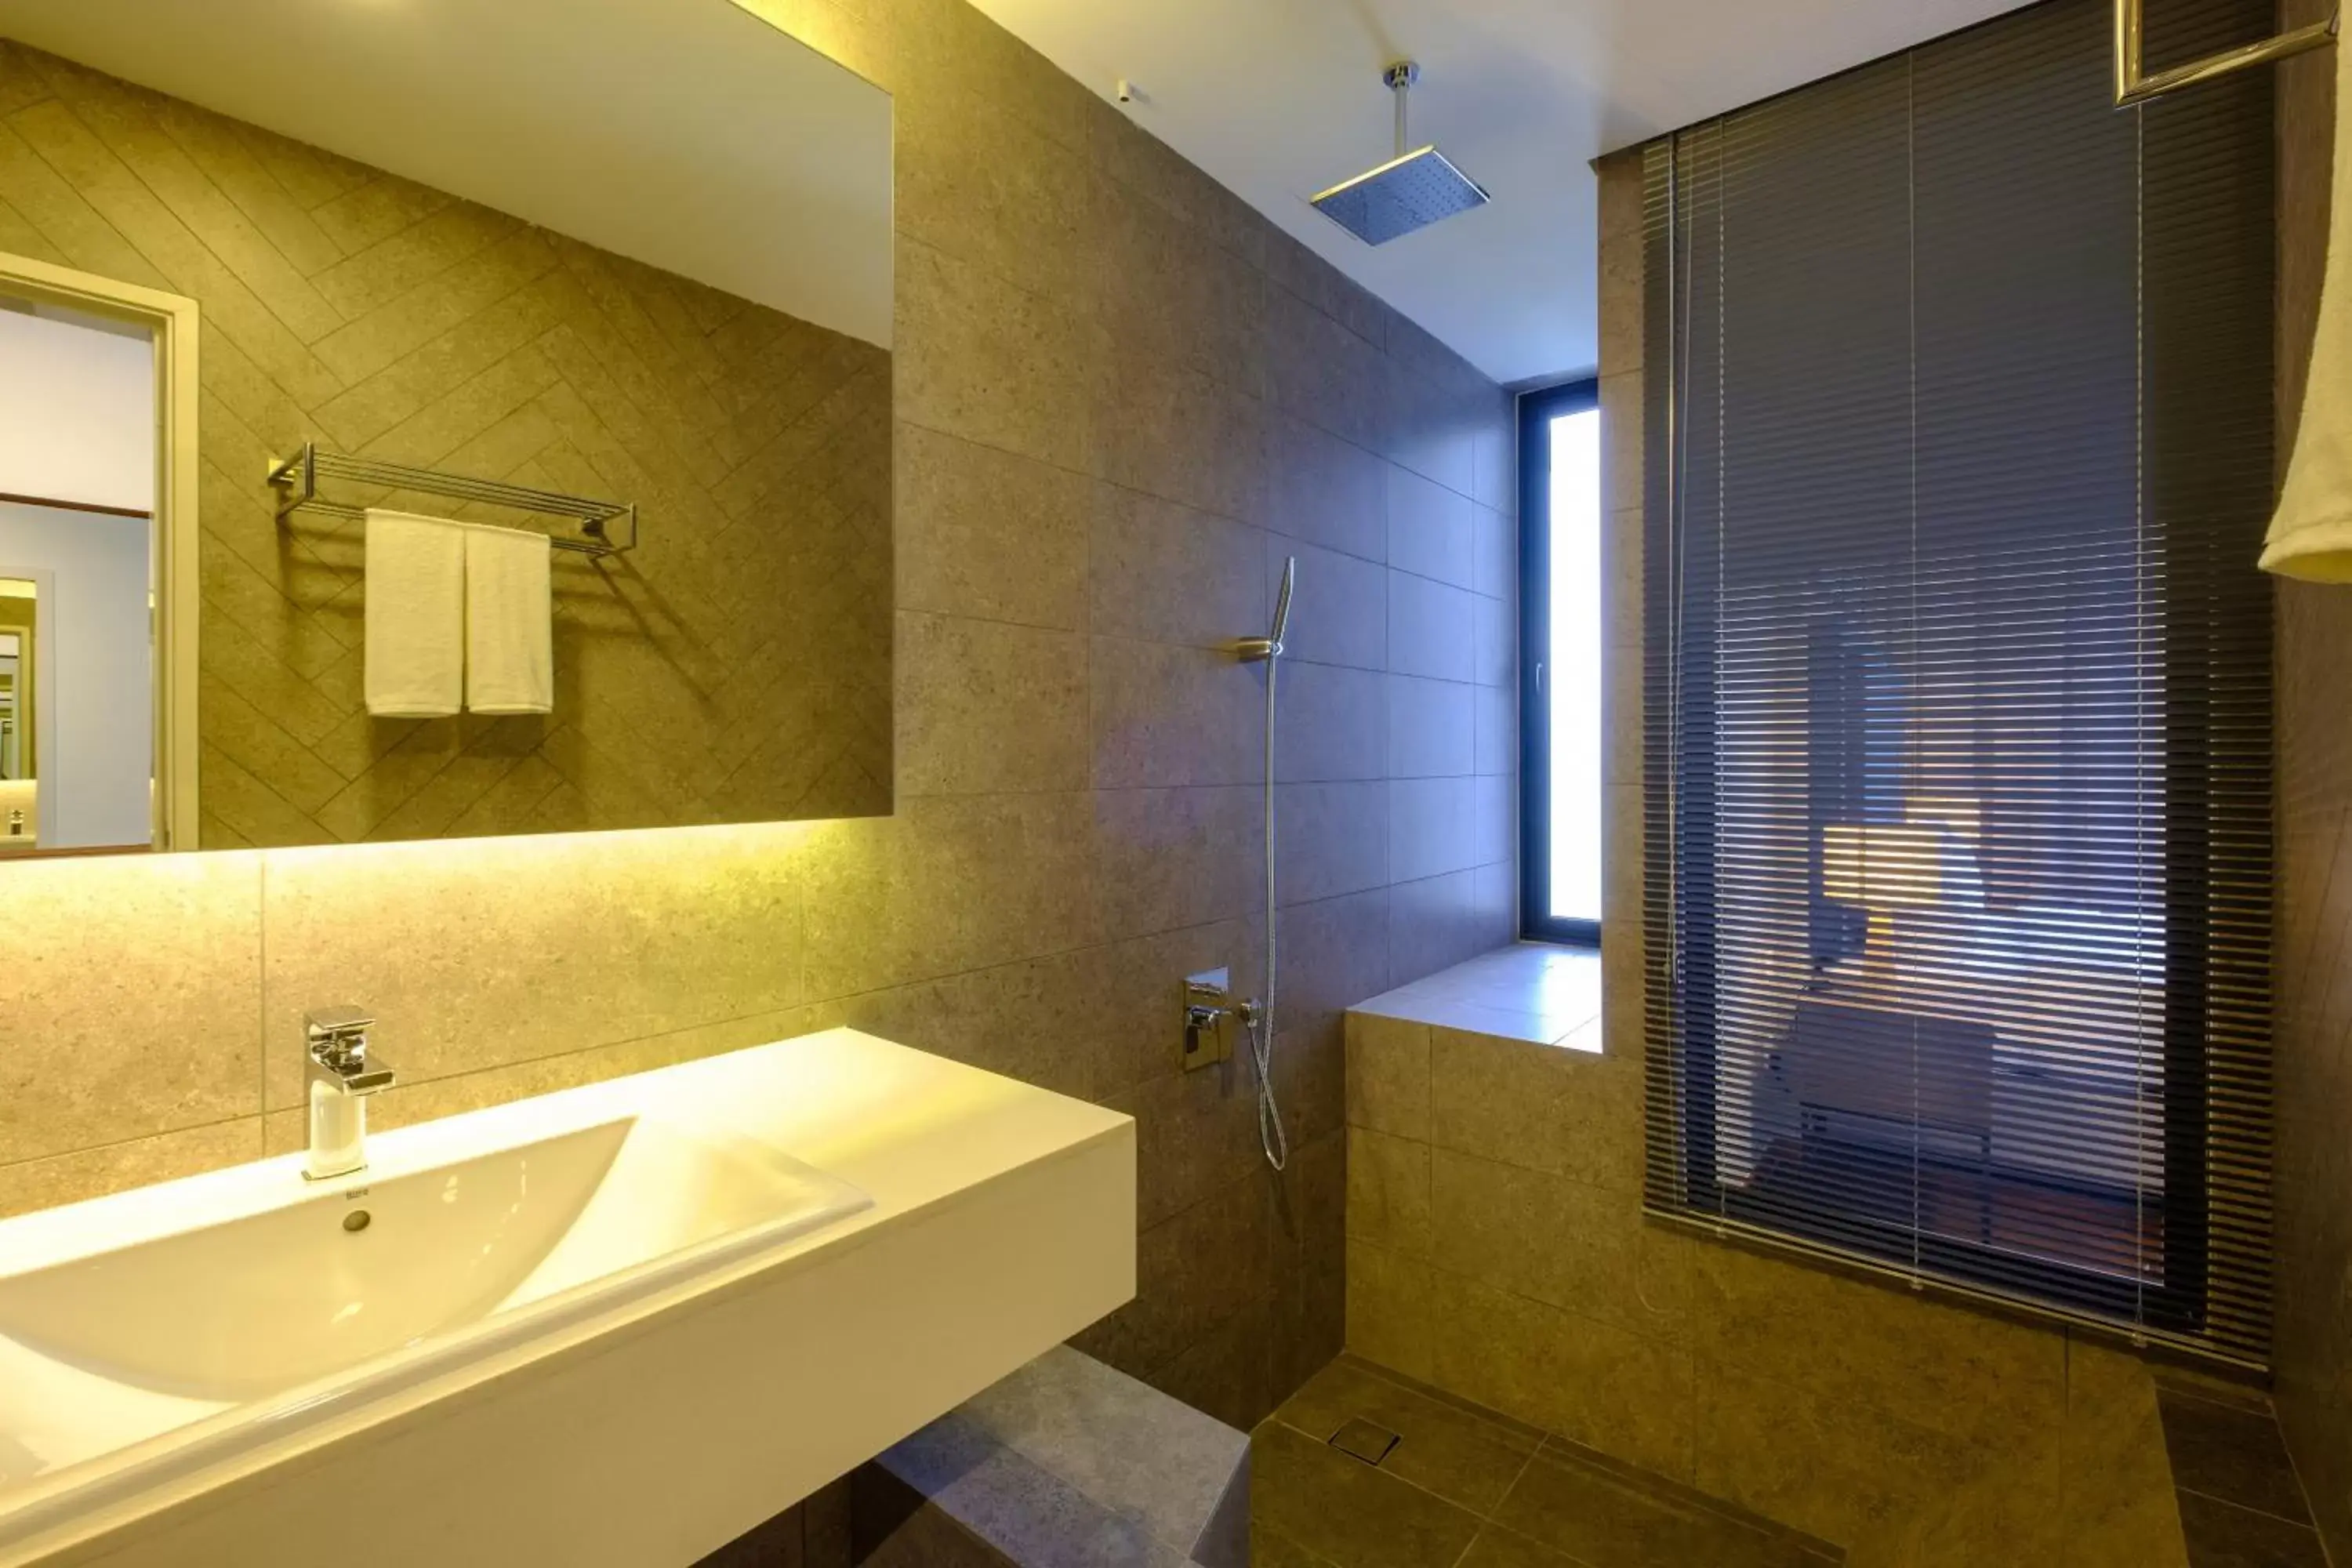 Bathroom in Tanjung Point Residences